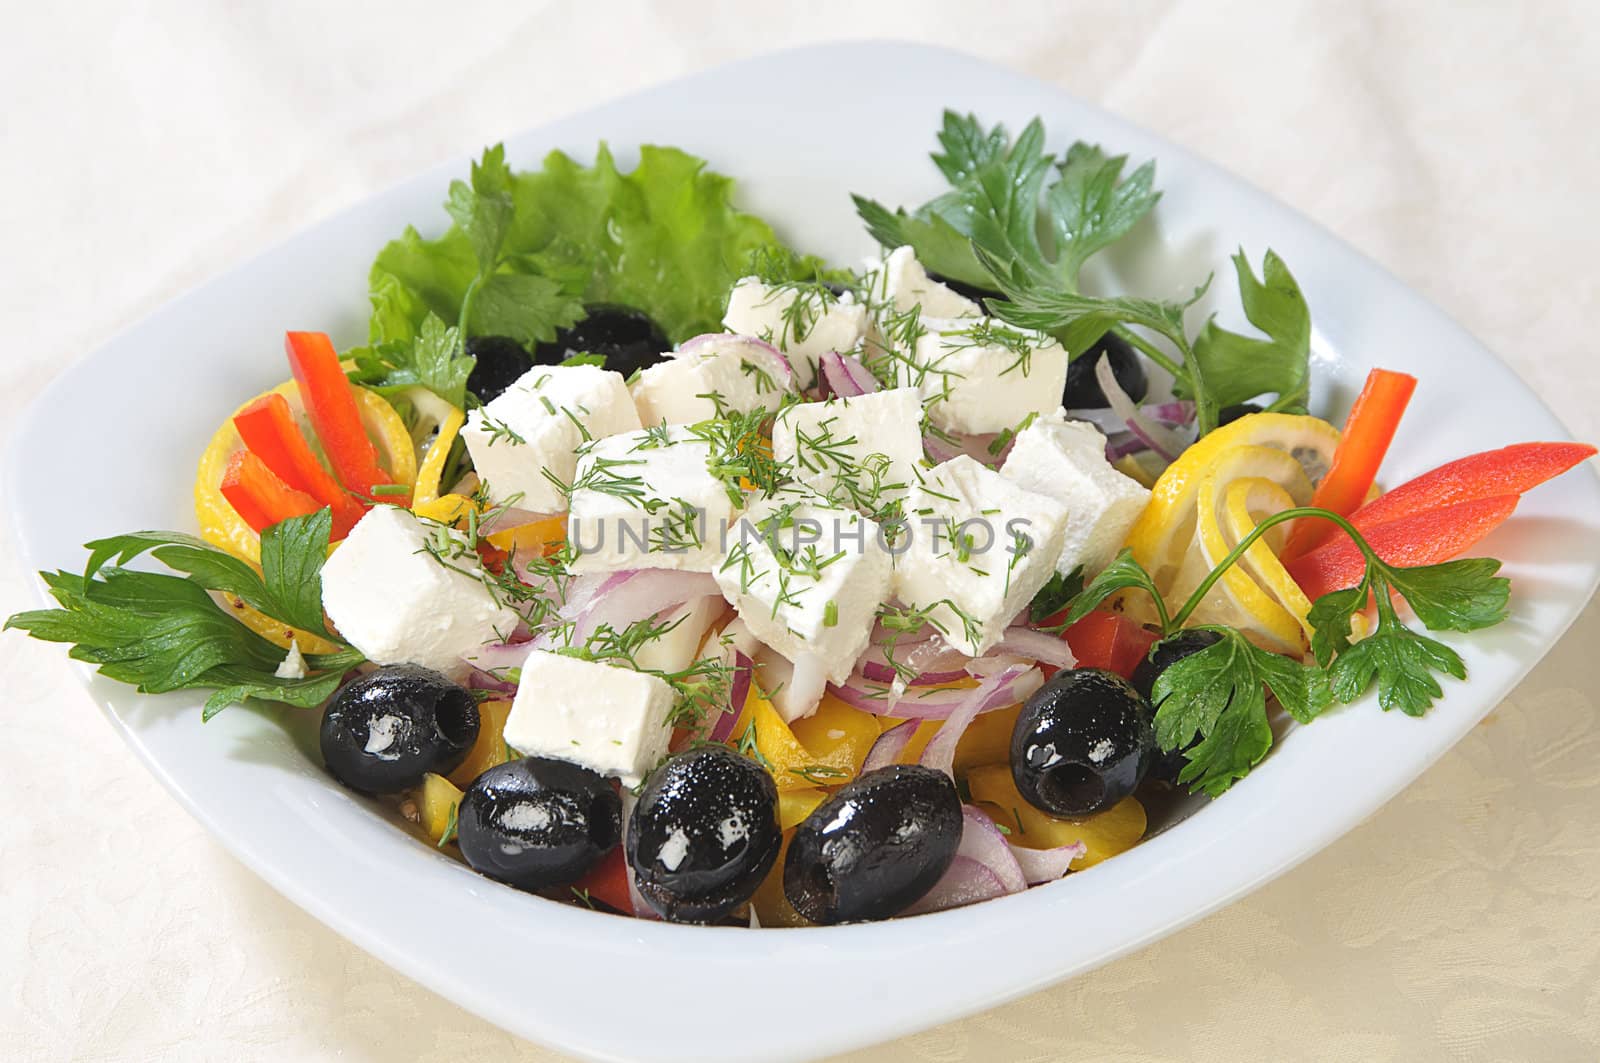 Slices of cheese in a salad of feta cheese and diced vegetables